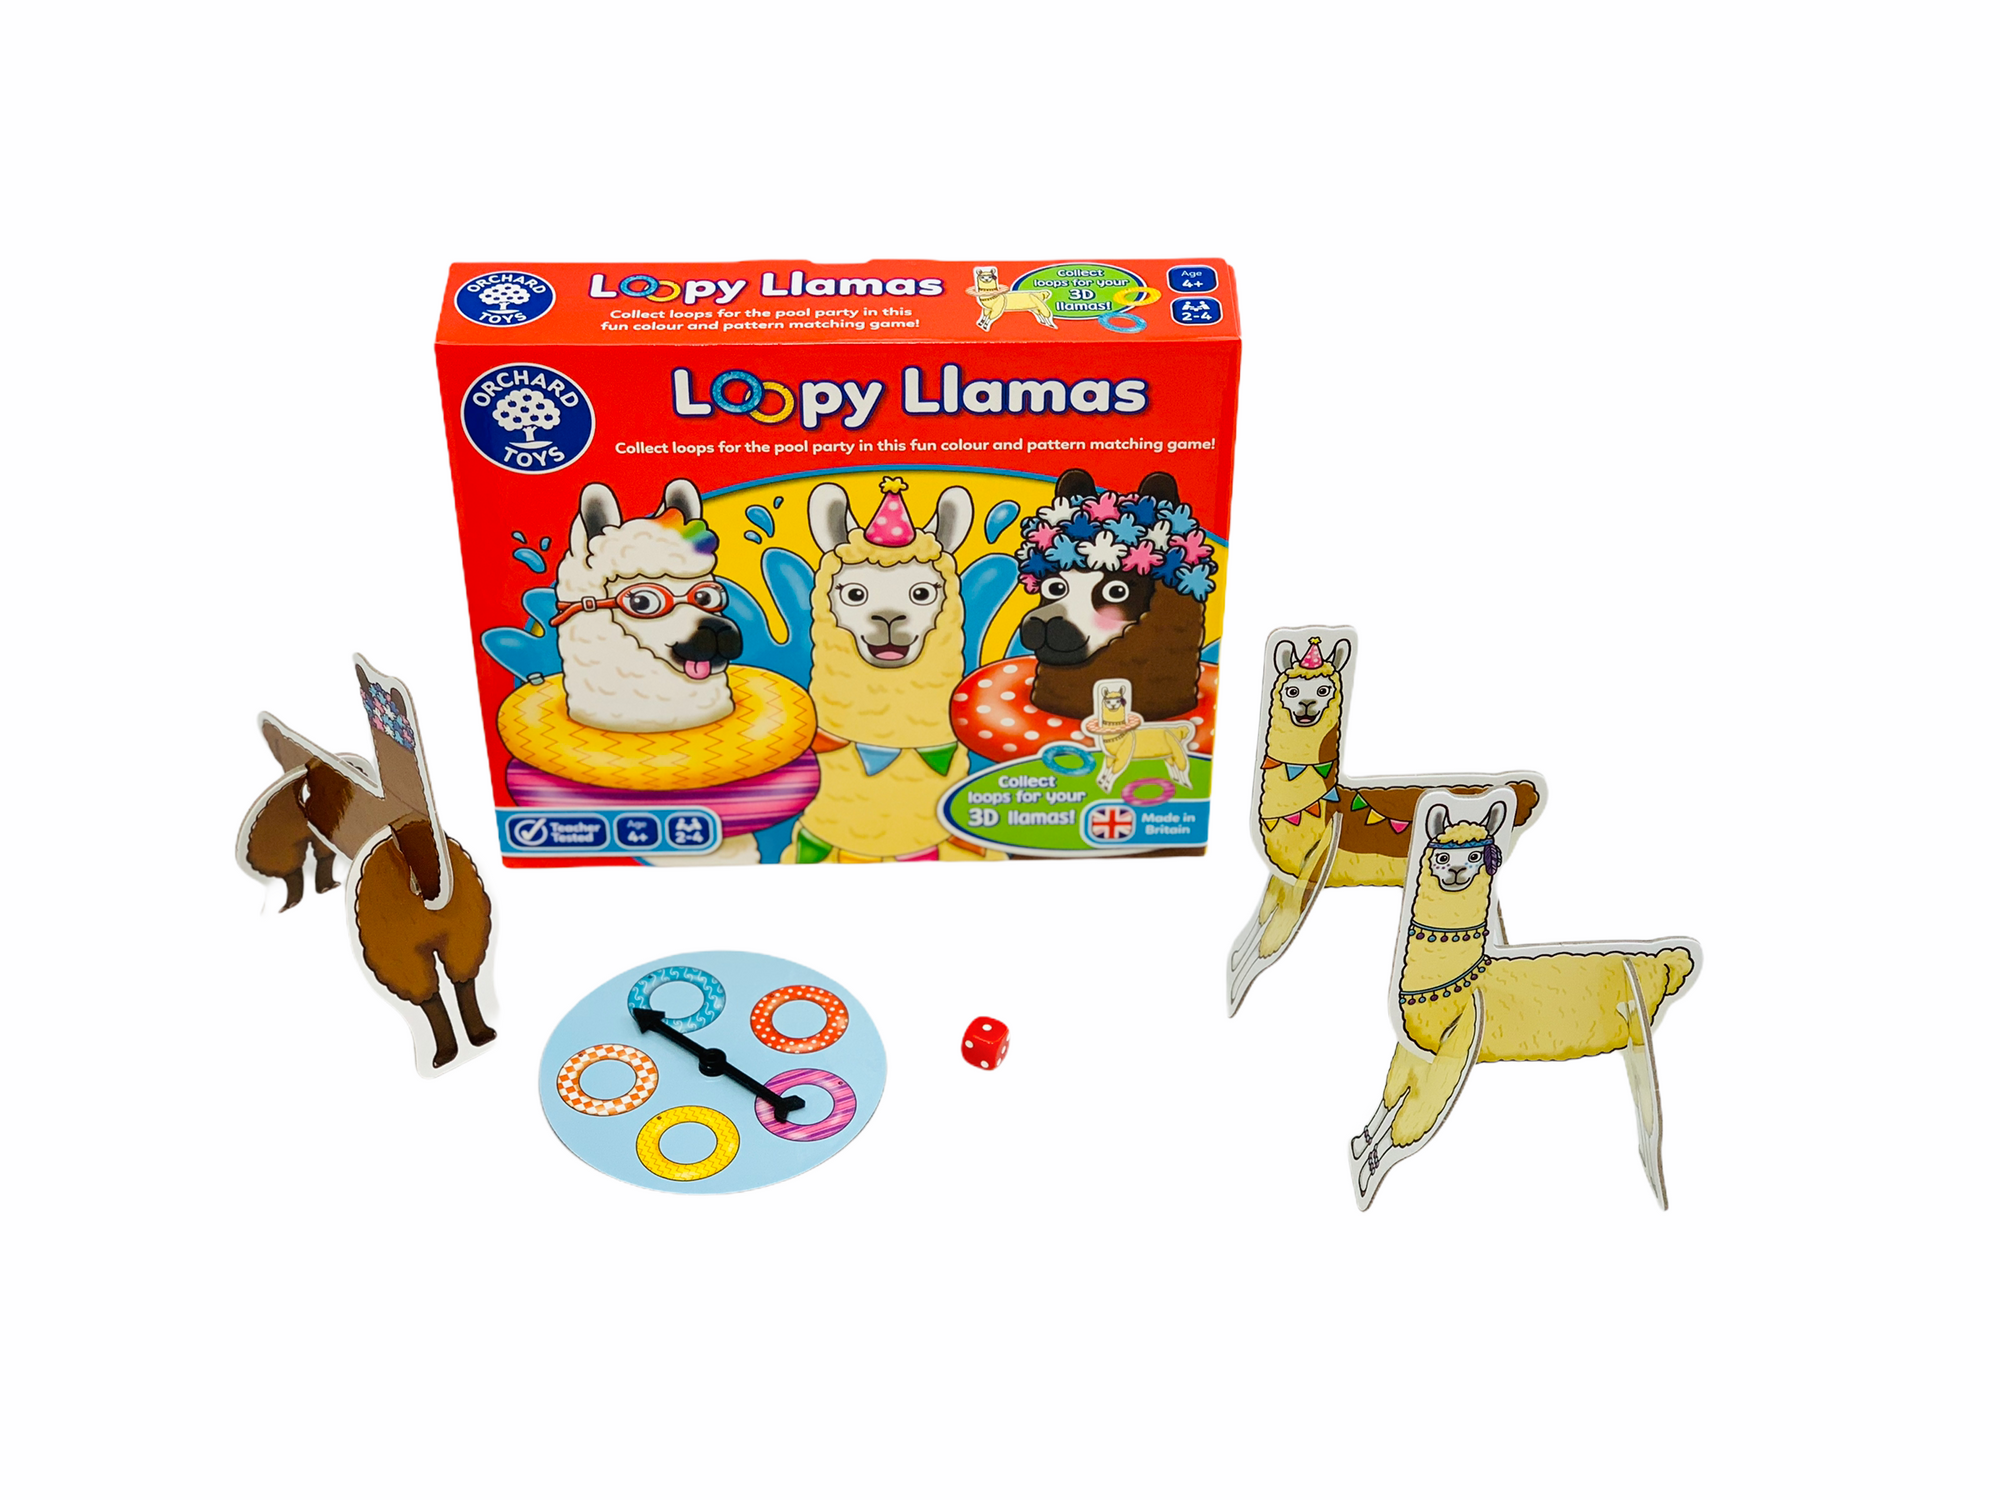 Orchard Loopy Llamas Game on display with pieces in front of box